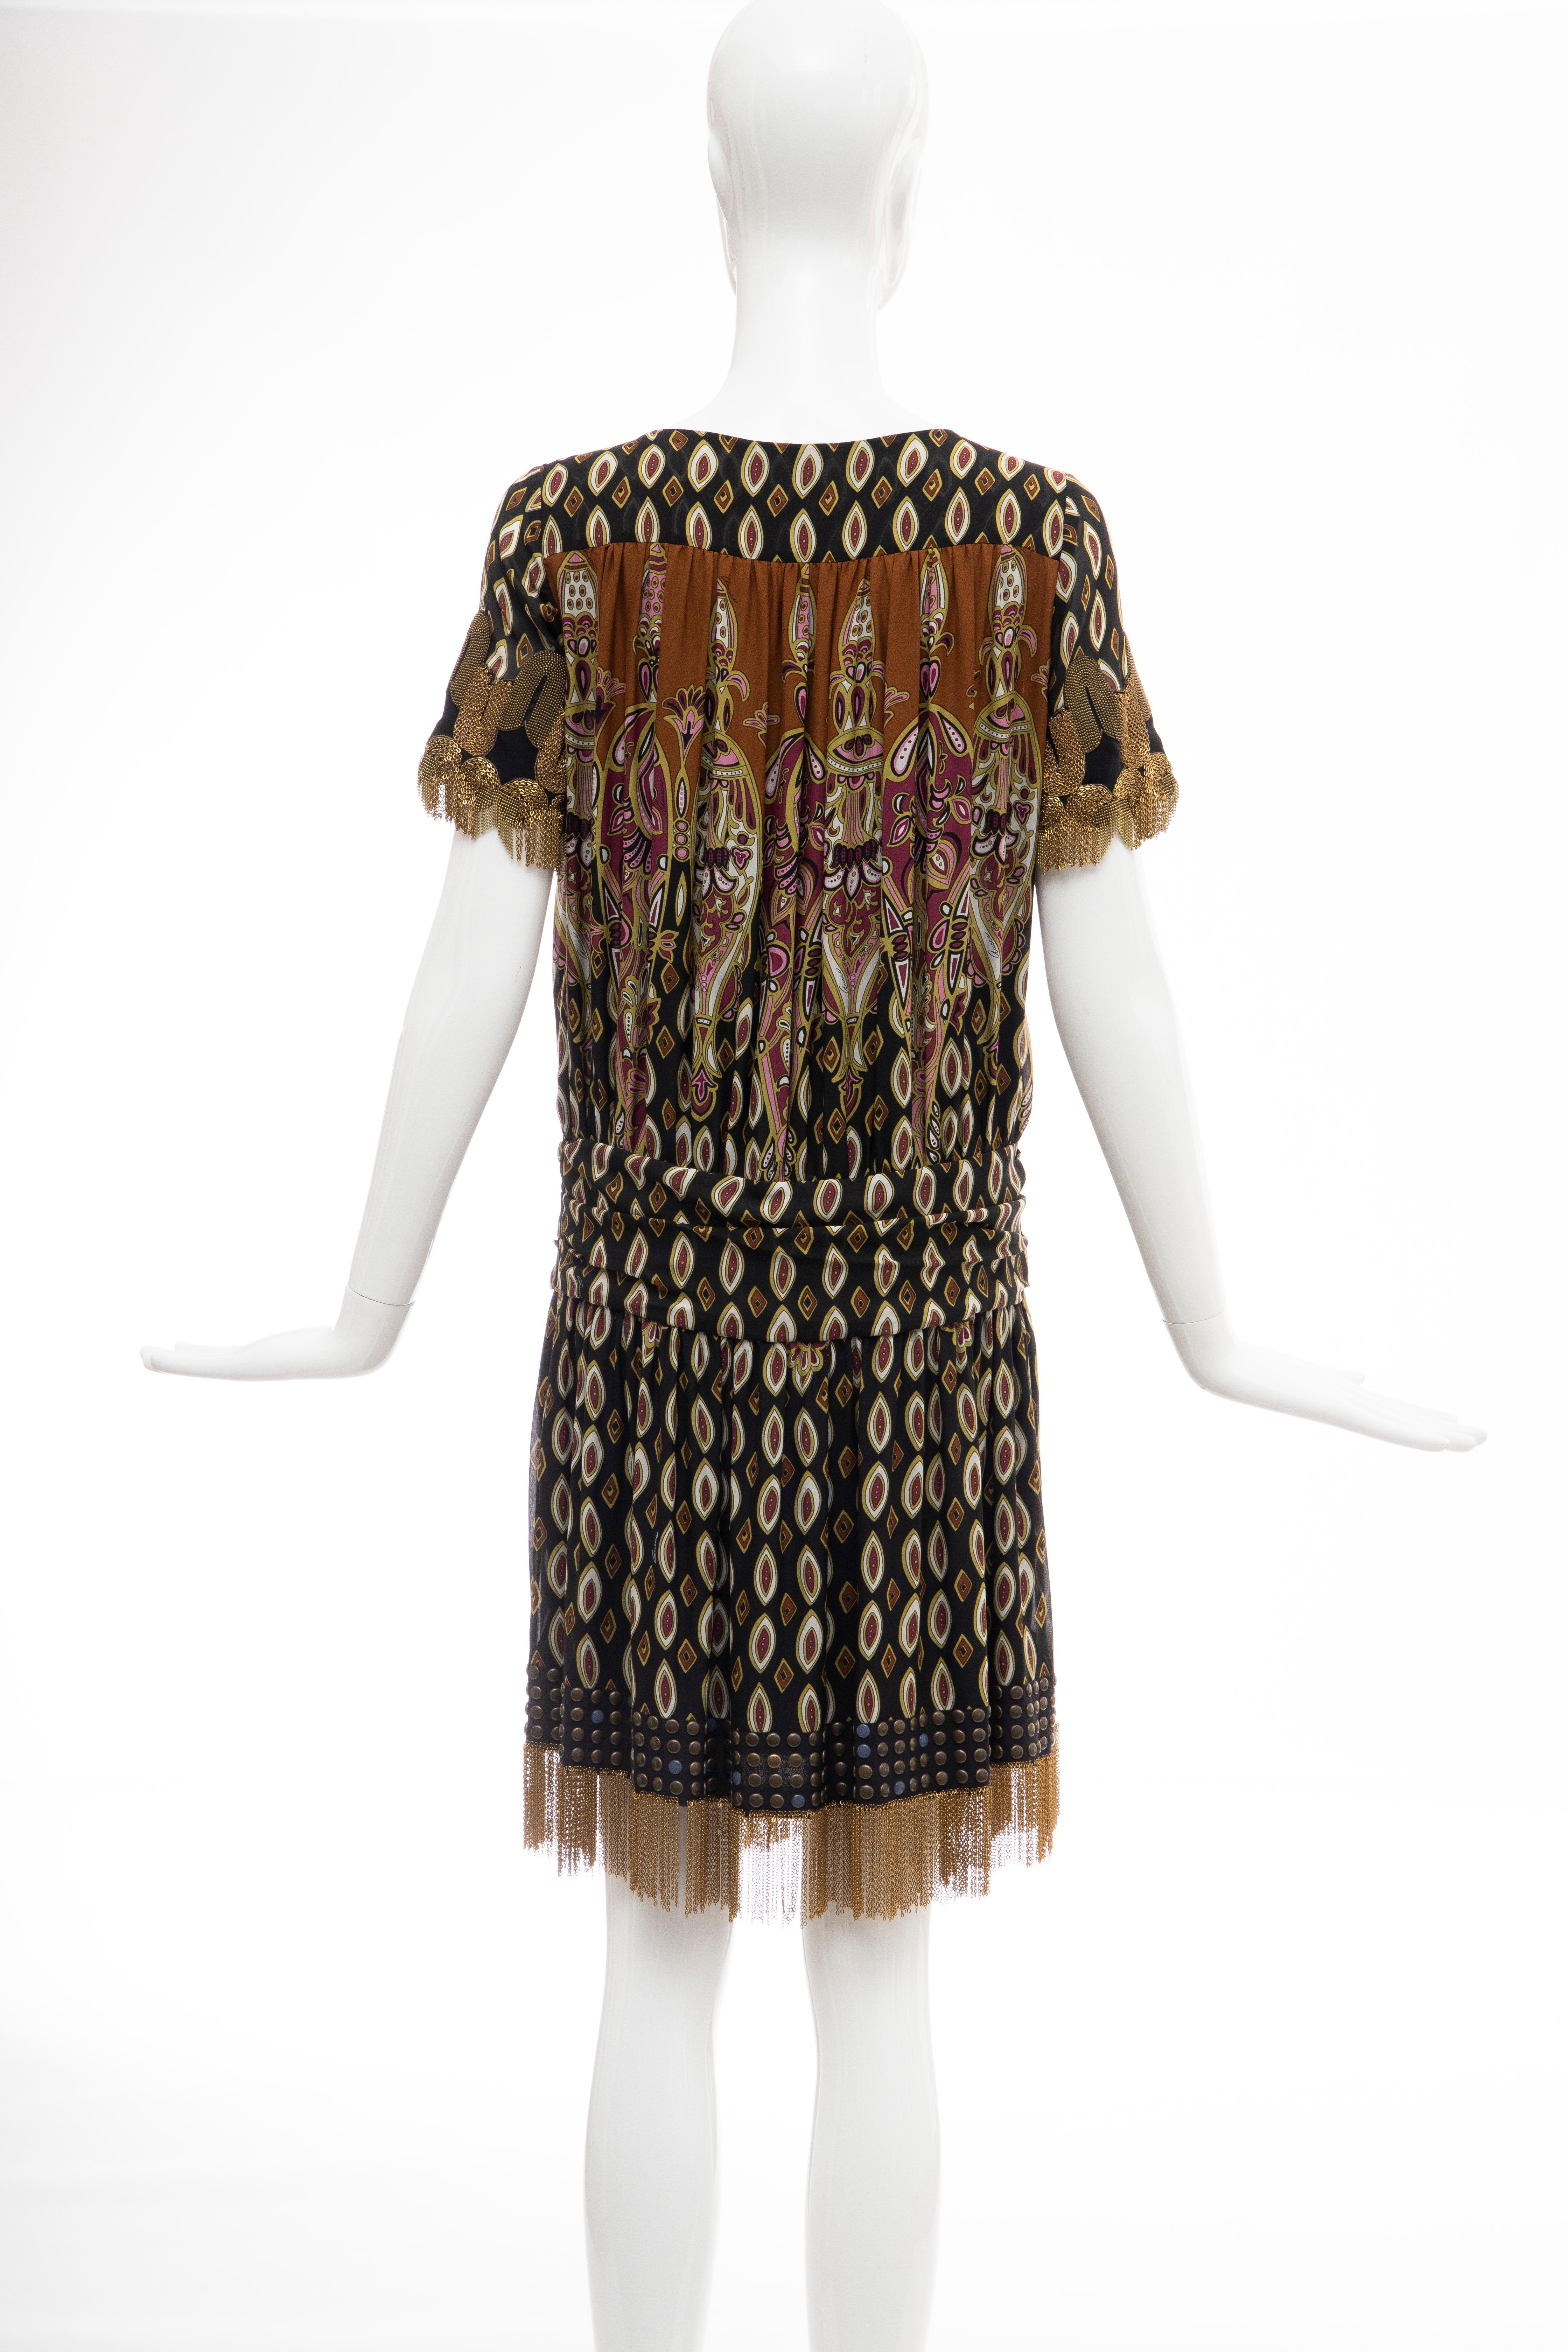 Frida Giannini for Gucci Runway Silk Boteh Pattern Brass Chains Dress, Fall 2008 For Sale 3